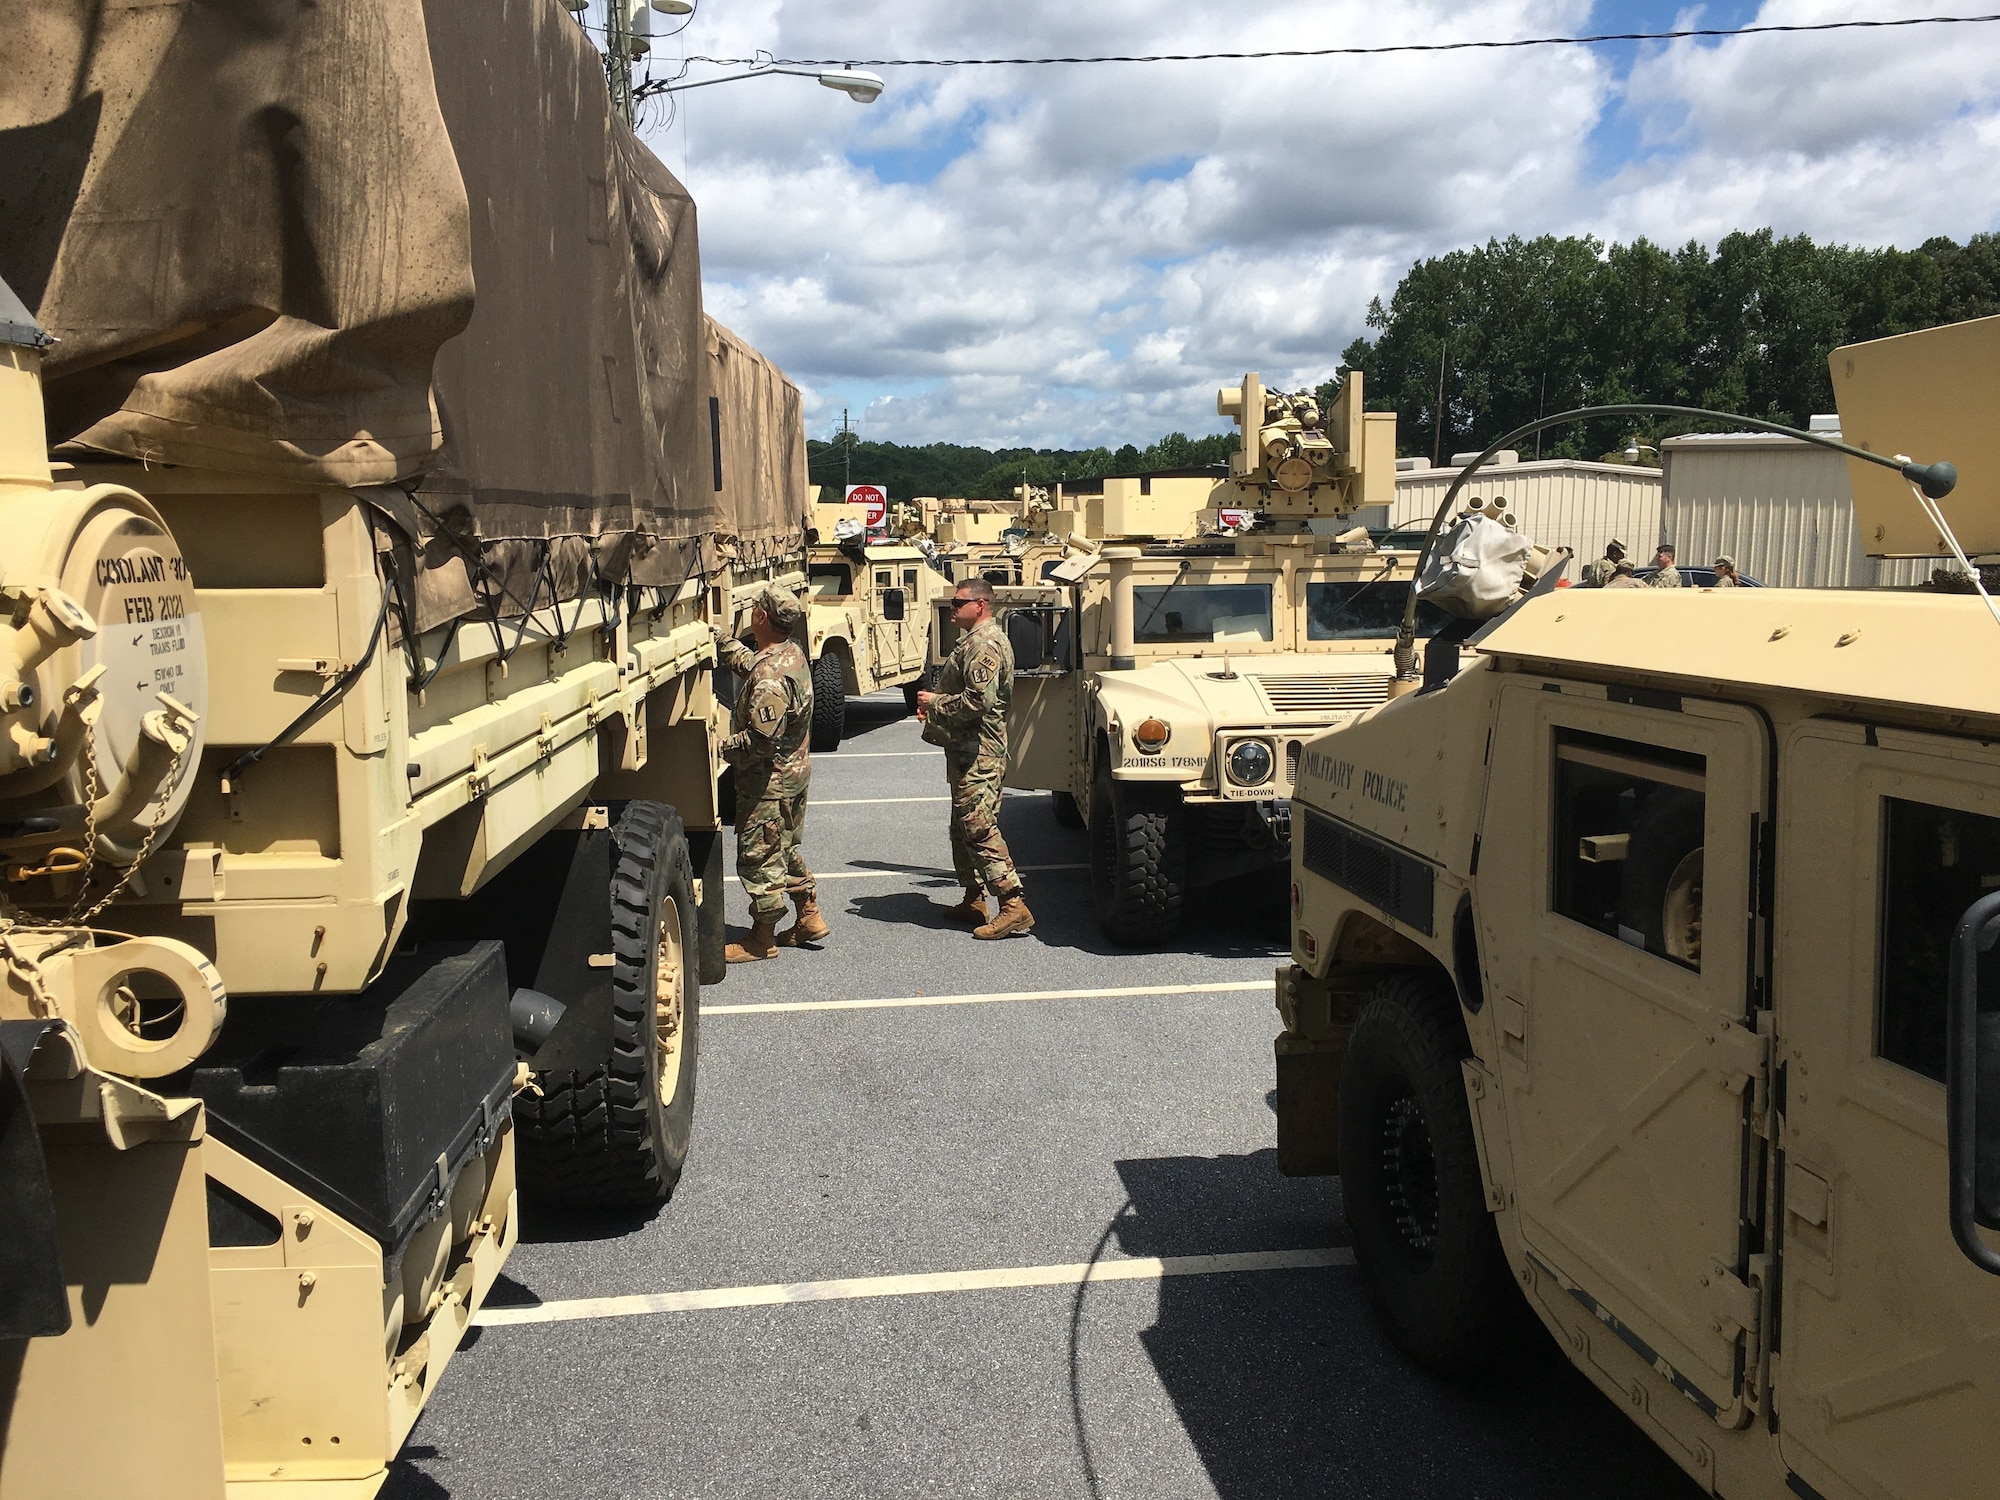 A massive convoy of Georgia National Guard personnel and equipment prepares to depart the armory of the 170th Military Police Battalion, 201st Regional Support Group, in Decatur, Georgia, Sept. 1, 2021. Convoys from across the state are moving relief supplies and heavy equipment along with Citizen-Soldiers and -Airmen who have honed their expertise at debris removal, transportation and logistics support, security and traffic control during responses to Hurricanes Irma, Michael and Dorian.